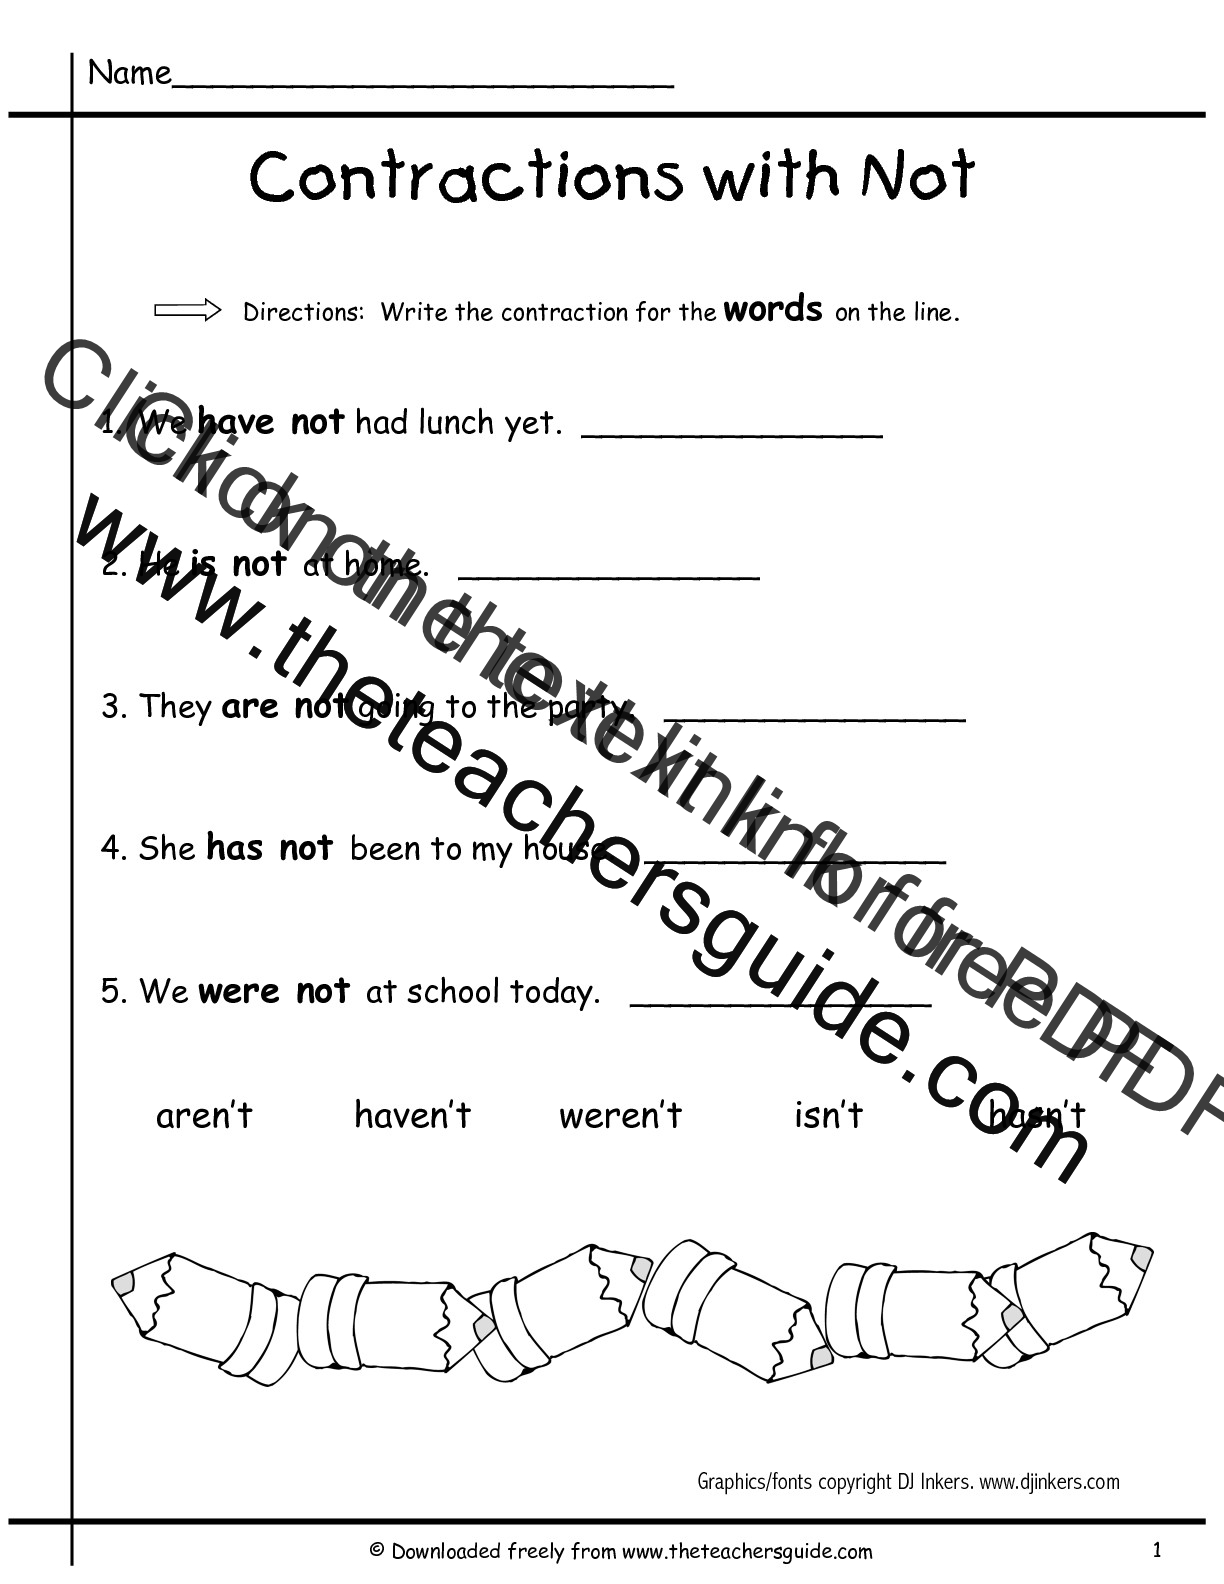 contractions-worksheet-students-write-contractions-for-words-with-not-images-frompo